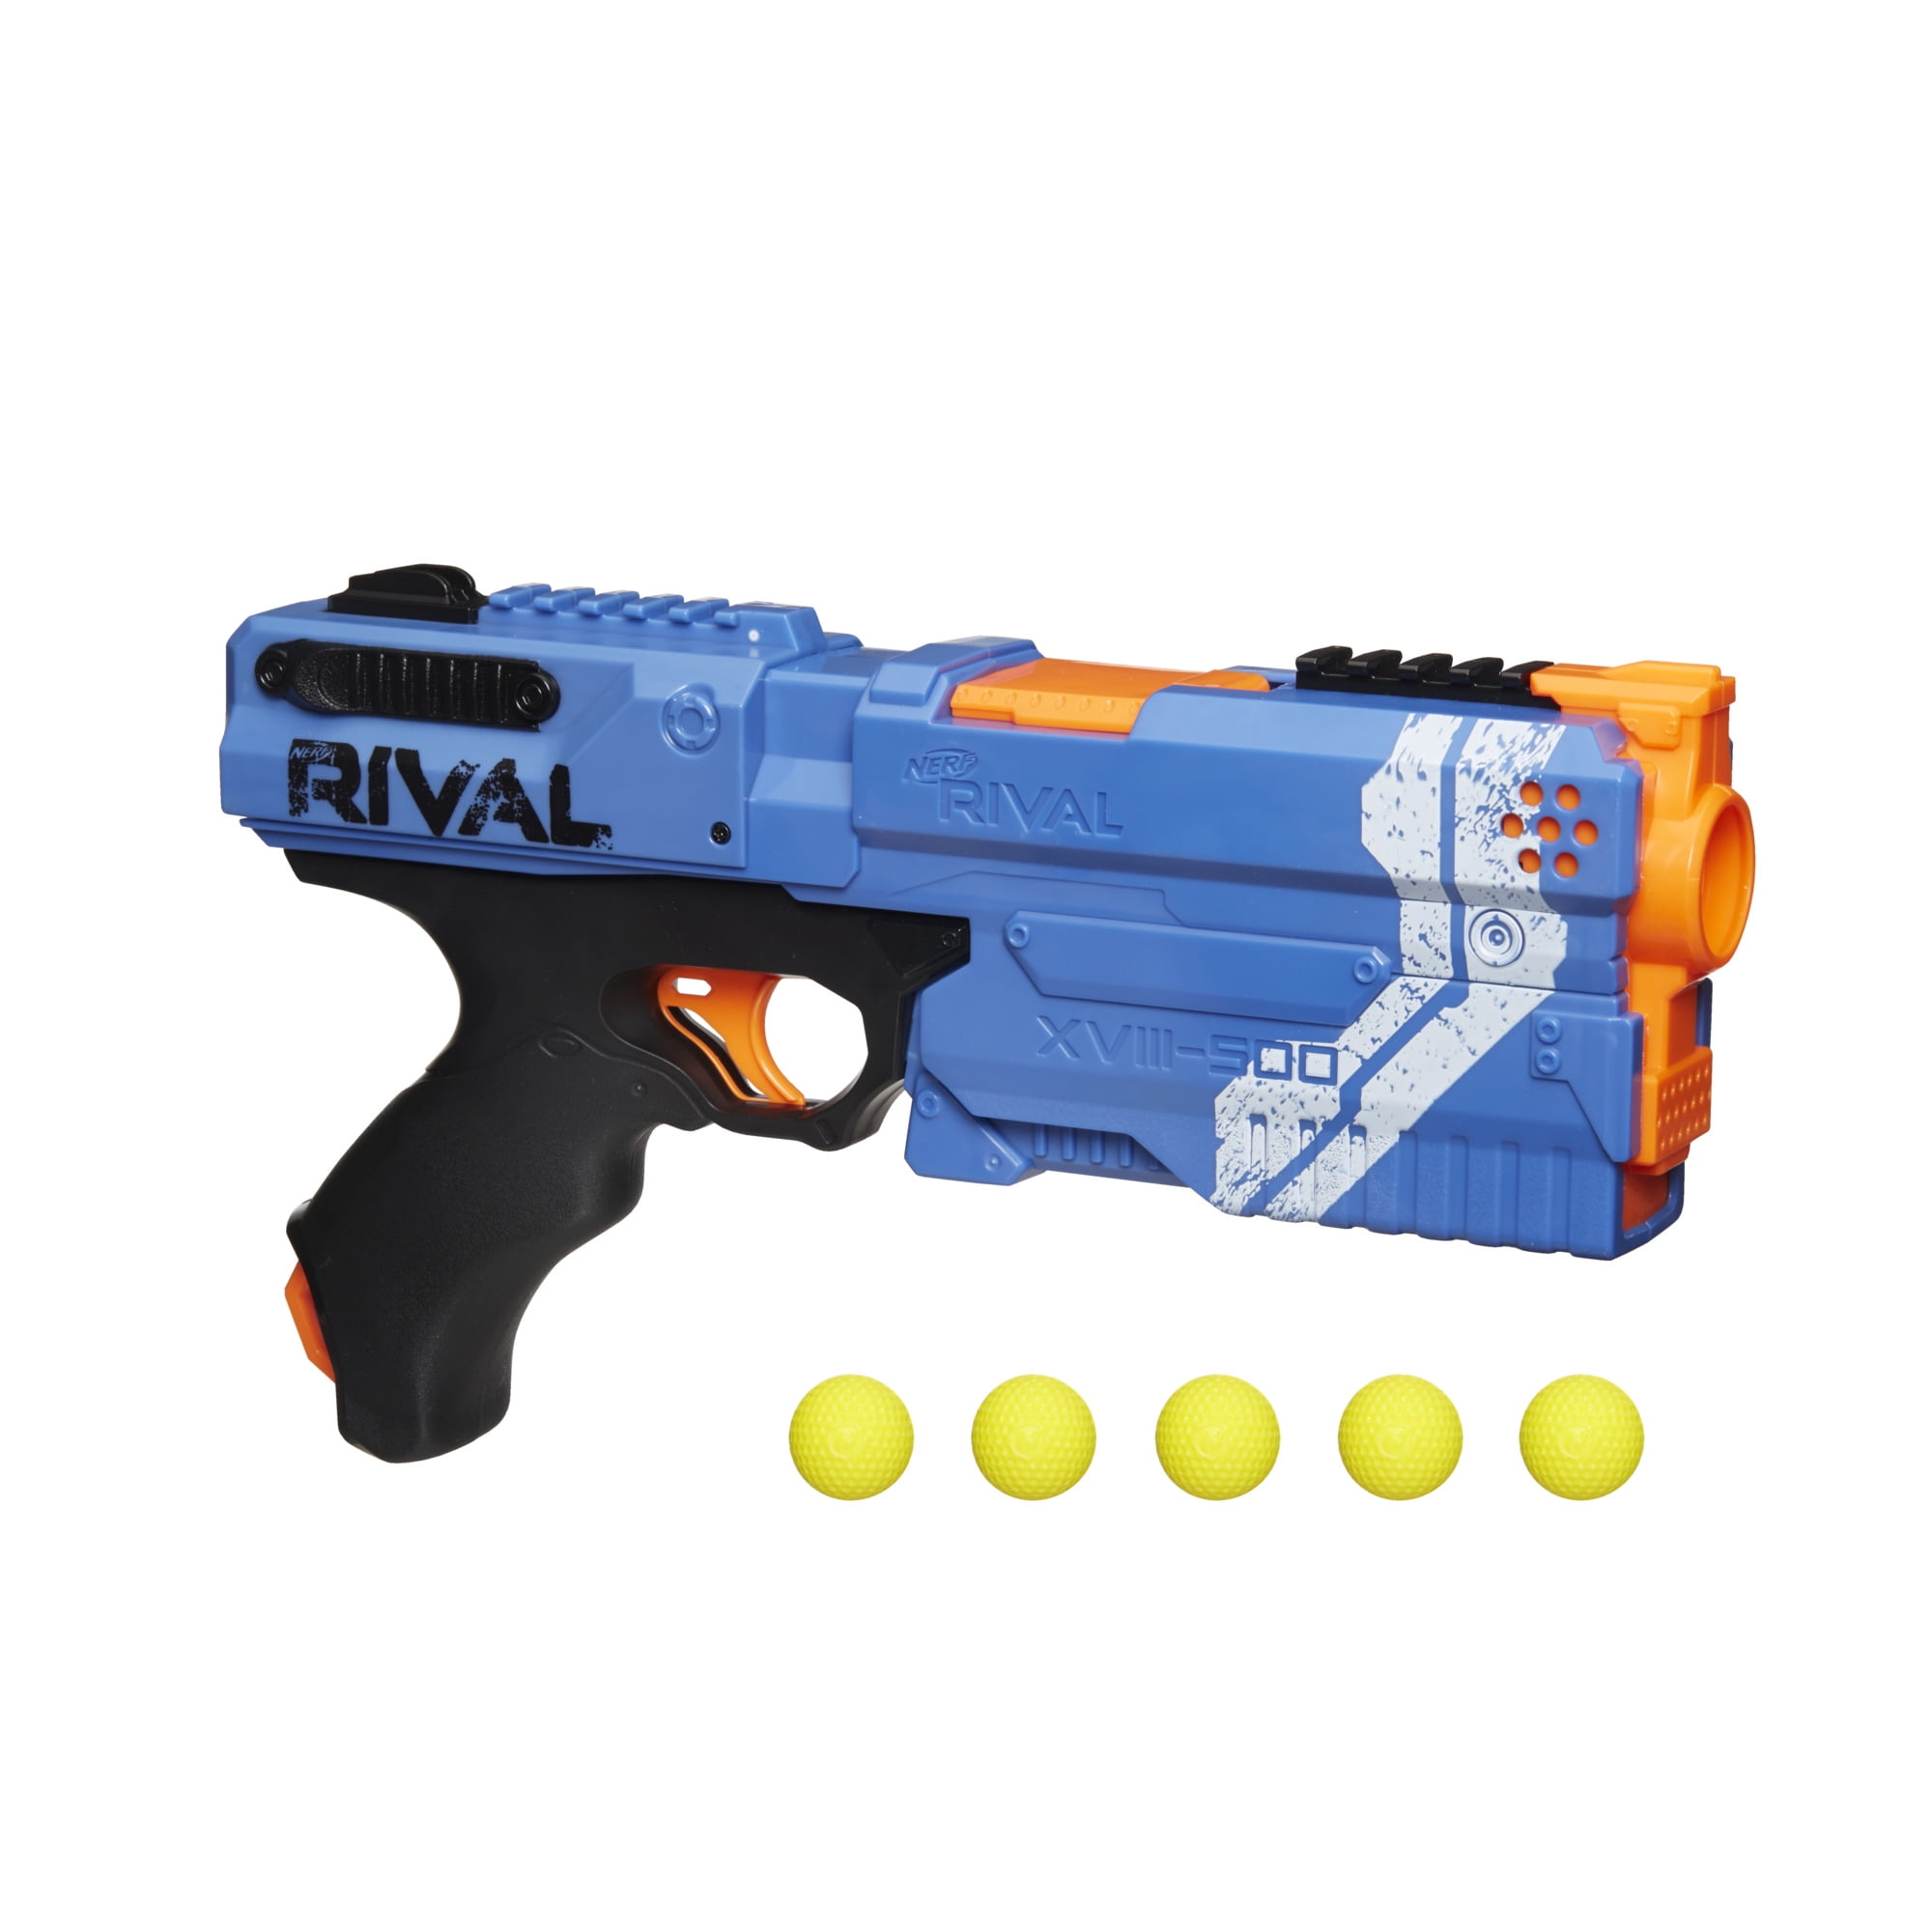 2 Mags FACTORY SEALED Nerf Rival Phantom Corps Helios XVIII-700 Gun w/24 Rounds 